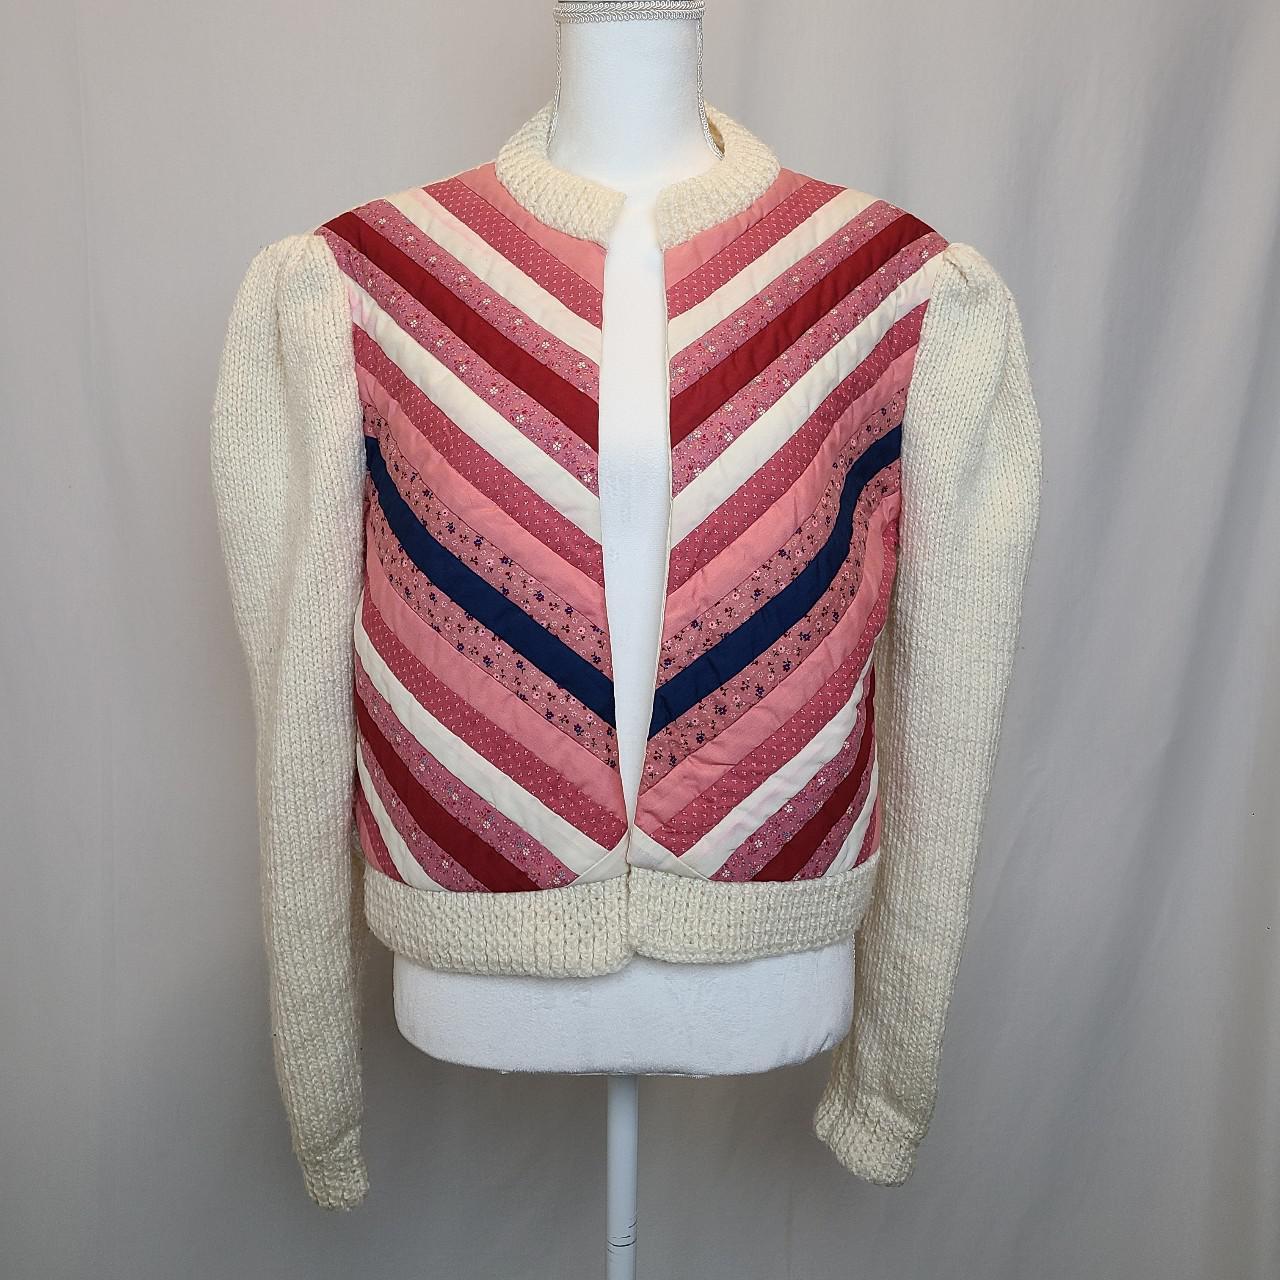 Product Image 1 - Handmade vintage quilted cardigan sweater.